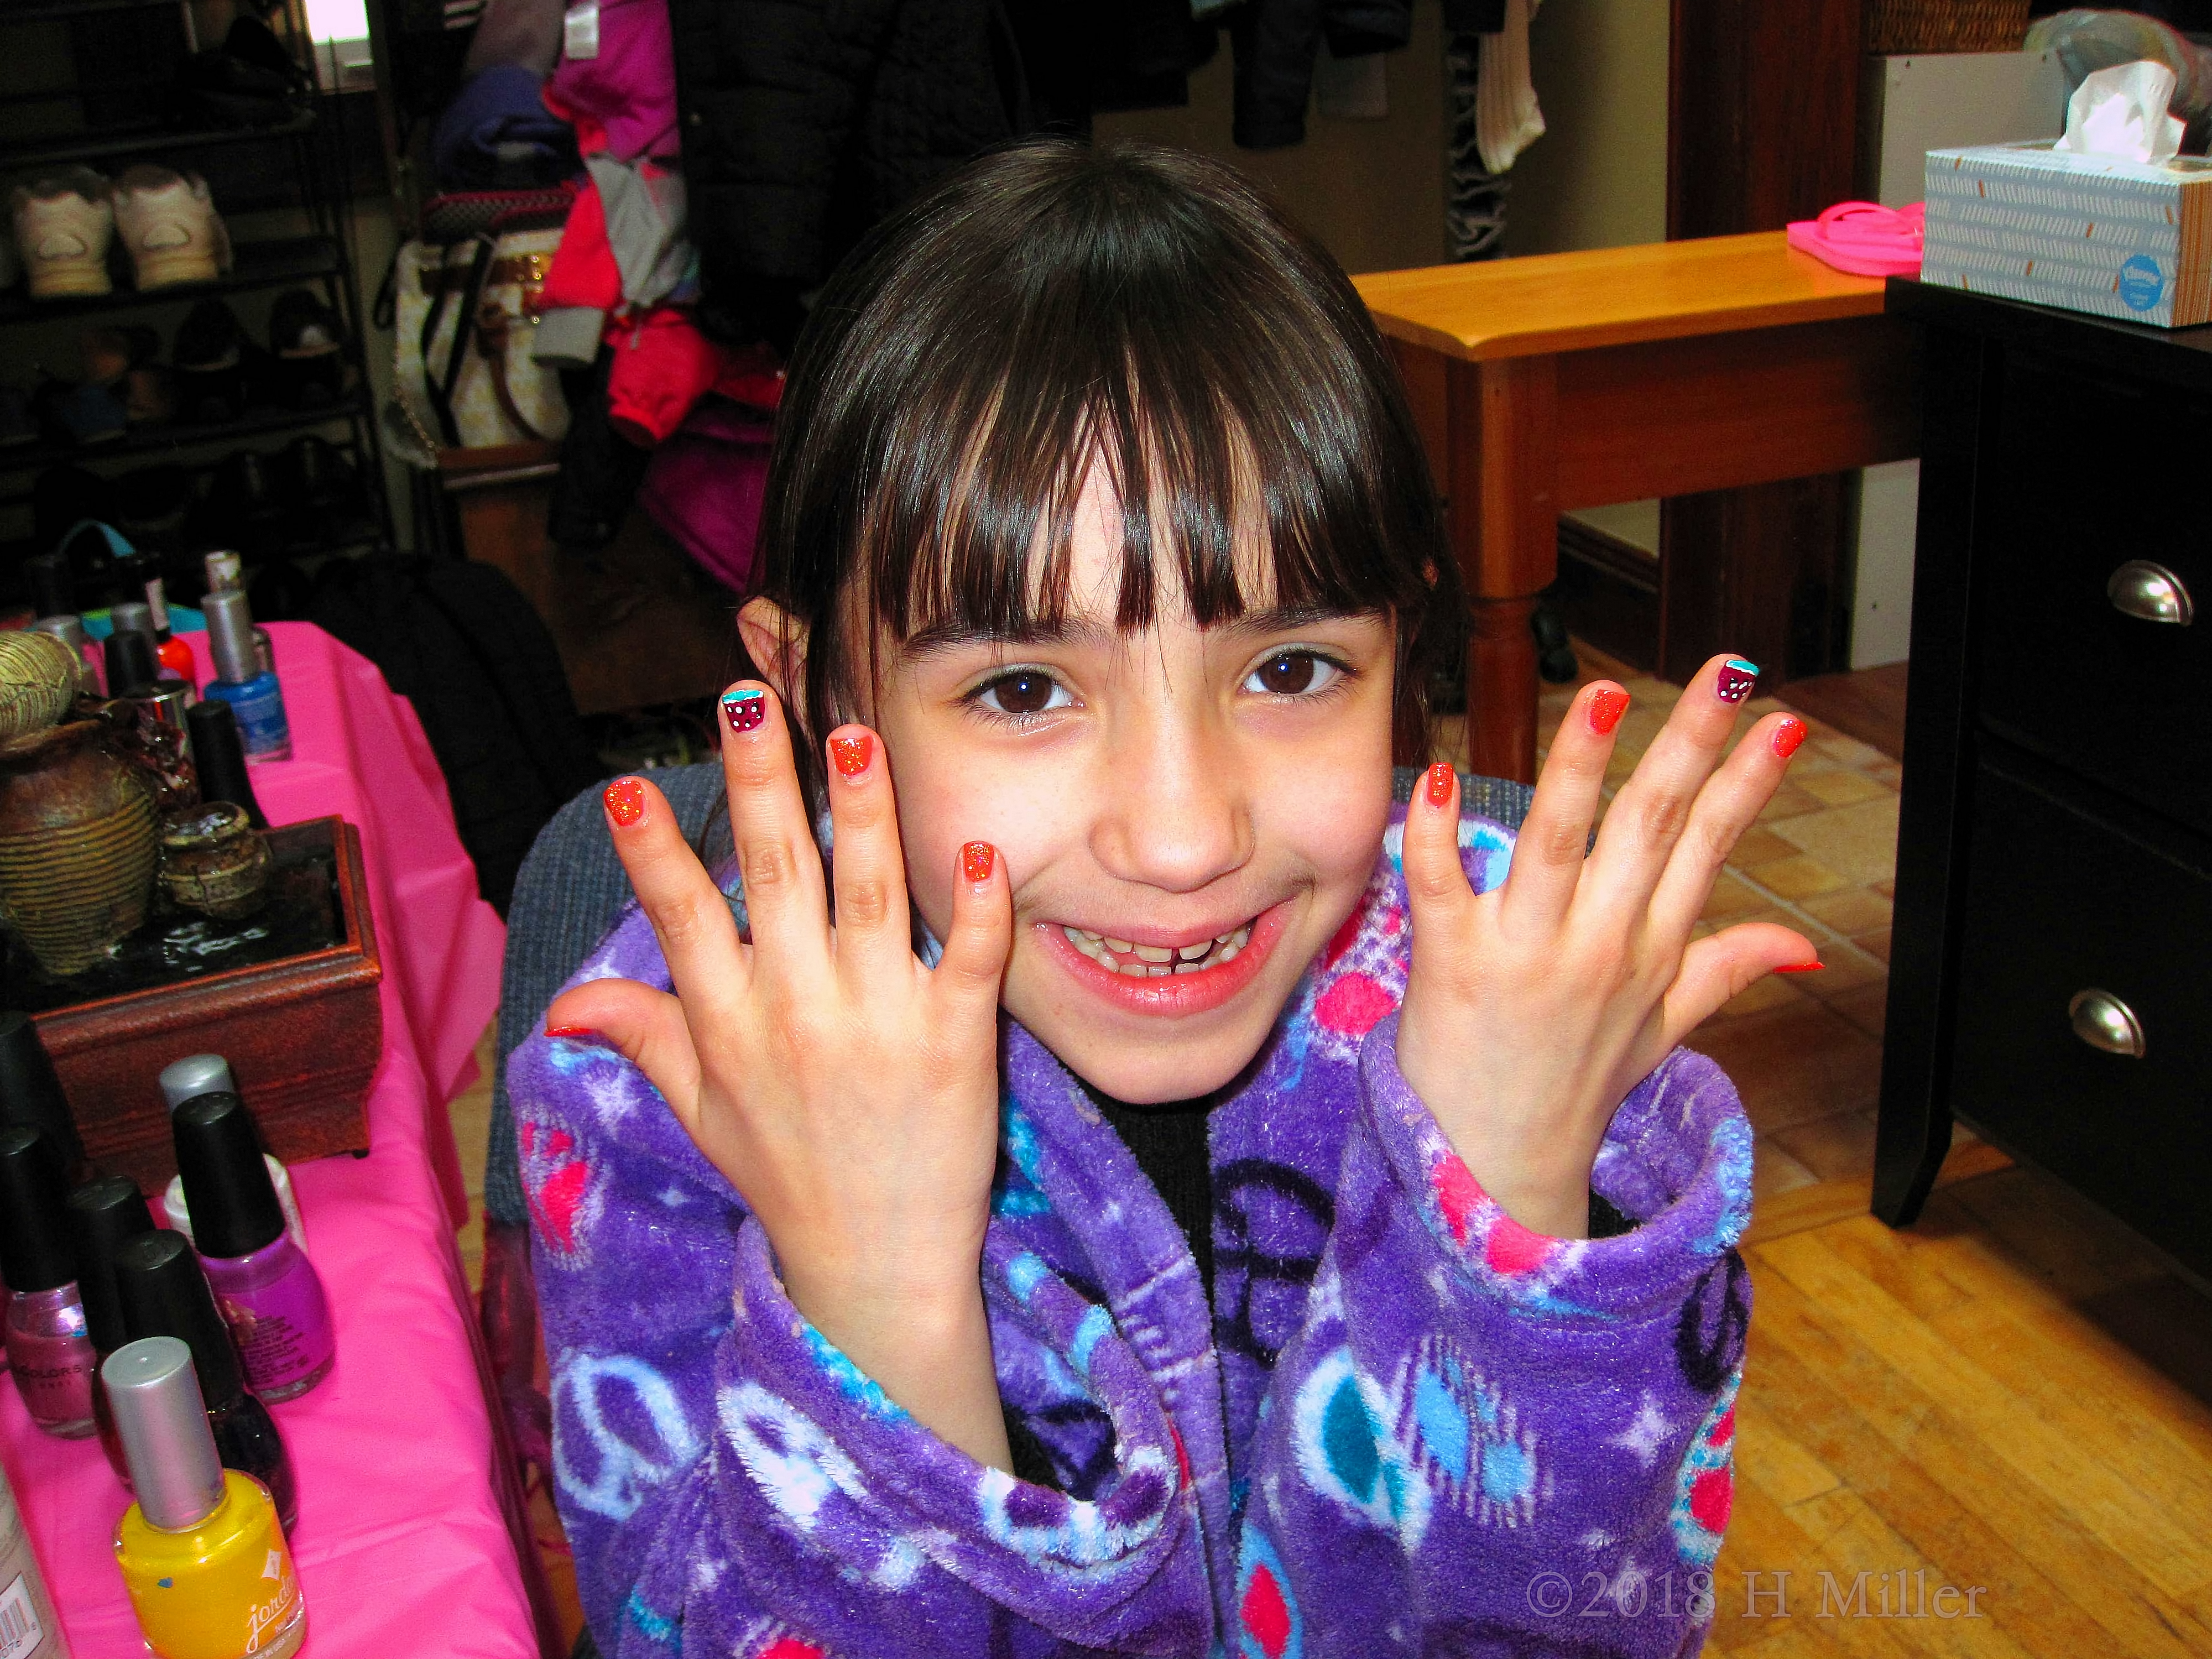 Big Smile With Beautiful Girls Manicure At The Kids Spa Party! 4